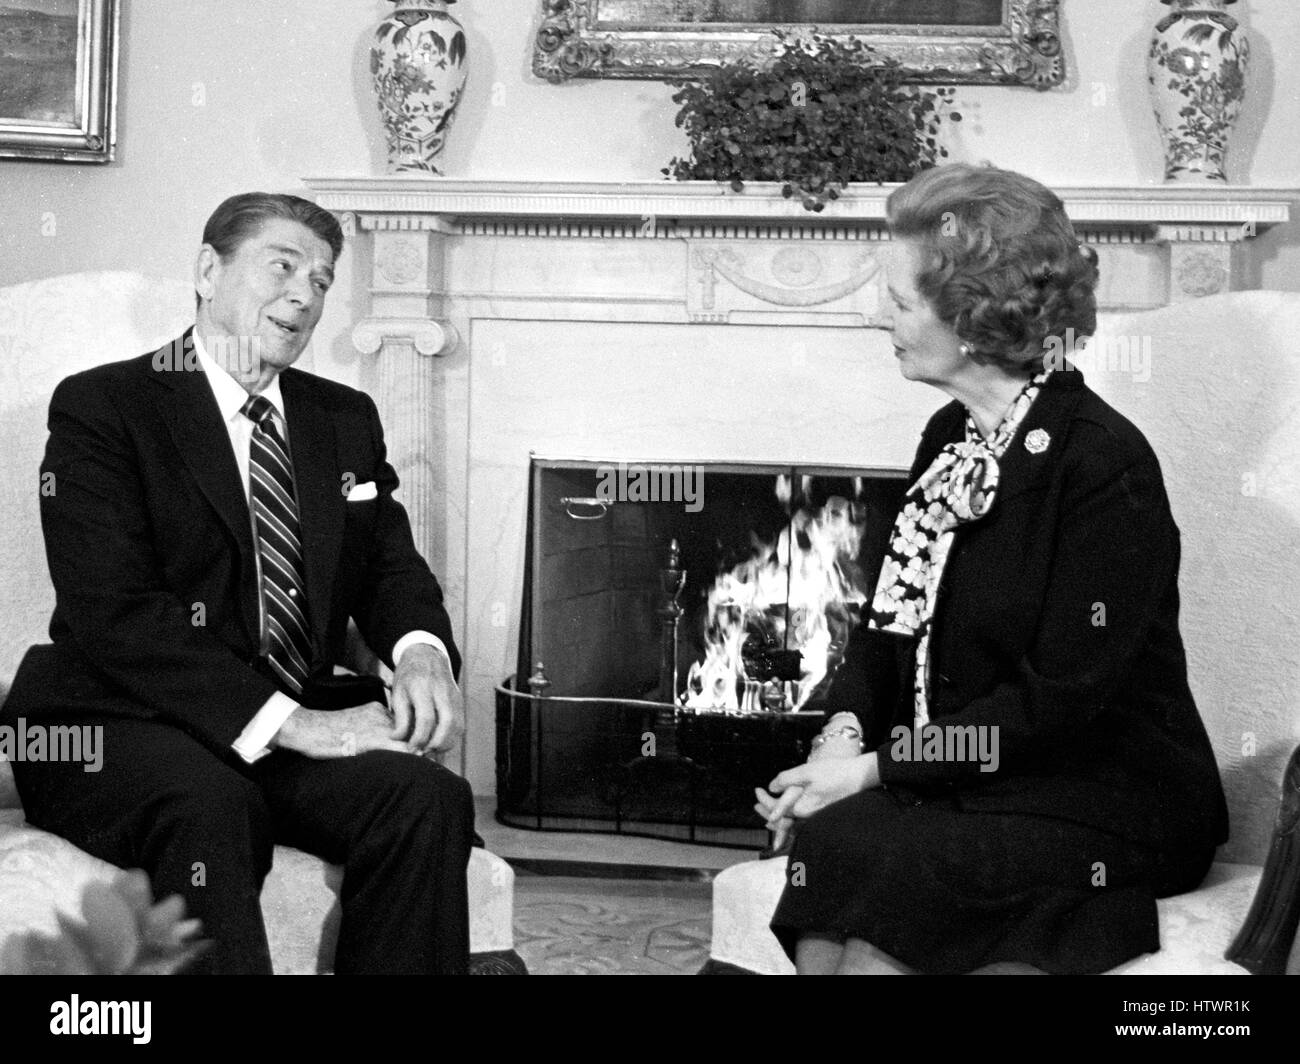 Washington, DC - (FILE) -- United States President Ronald Reagan and Prime Minister Margaret Thatcher of Great Britain meet in the Oval Office of the White House in Washington, D.C on Wednesday, February 20, 1985 Their meeting lasted 2 hours.. Stock Photo